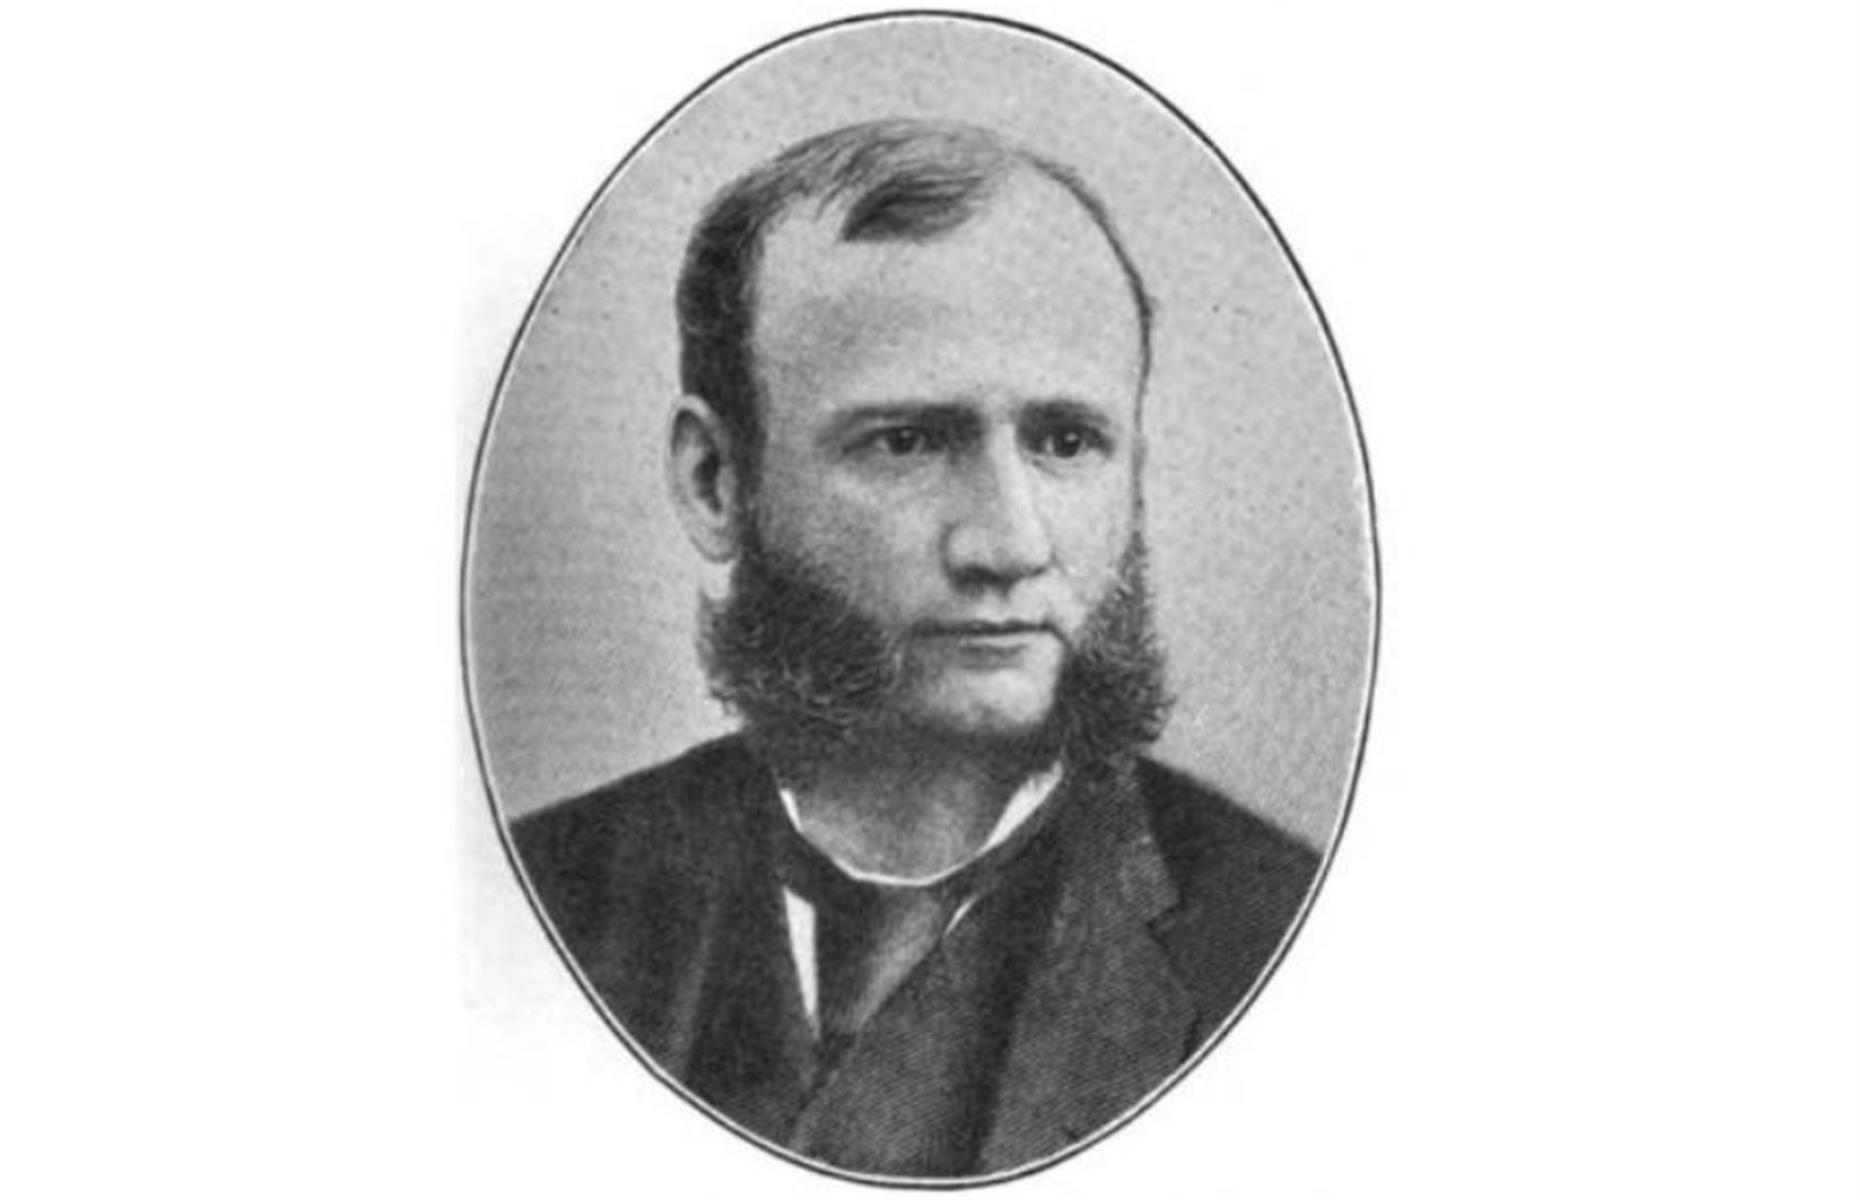 <p>Though the lesser known of the Carnegie brothers, Thomas Carnegie was a steel industrialist in his own right, and the co-founder of the Edgar Thomson Steel Works. In 1881, Thomas purchased land on Cumberland Island in Georgia as a gift for his wife Lucy and their nine children, on which he commissioned the construction of an enormous mansion.</p>  <p>The 59-room Dungeness, as the home would be called, was modelled after the turreted castles of Carnegie's native Scotland.</p>